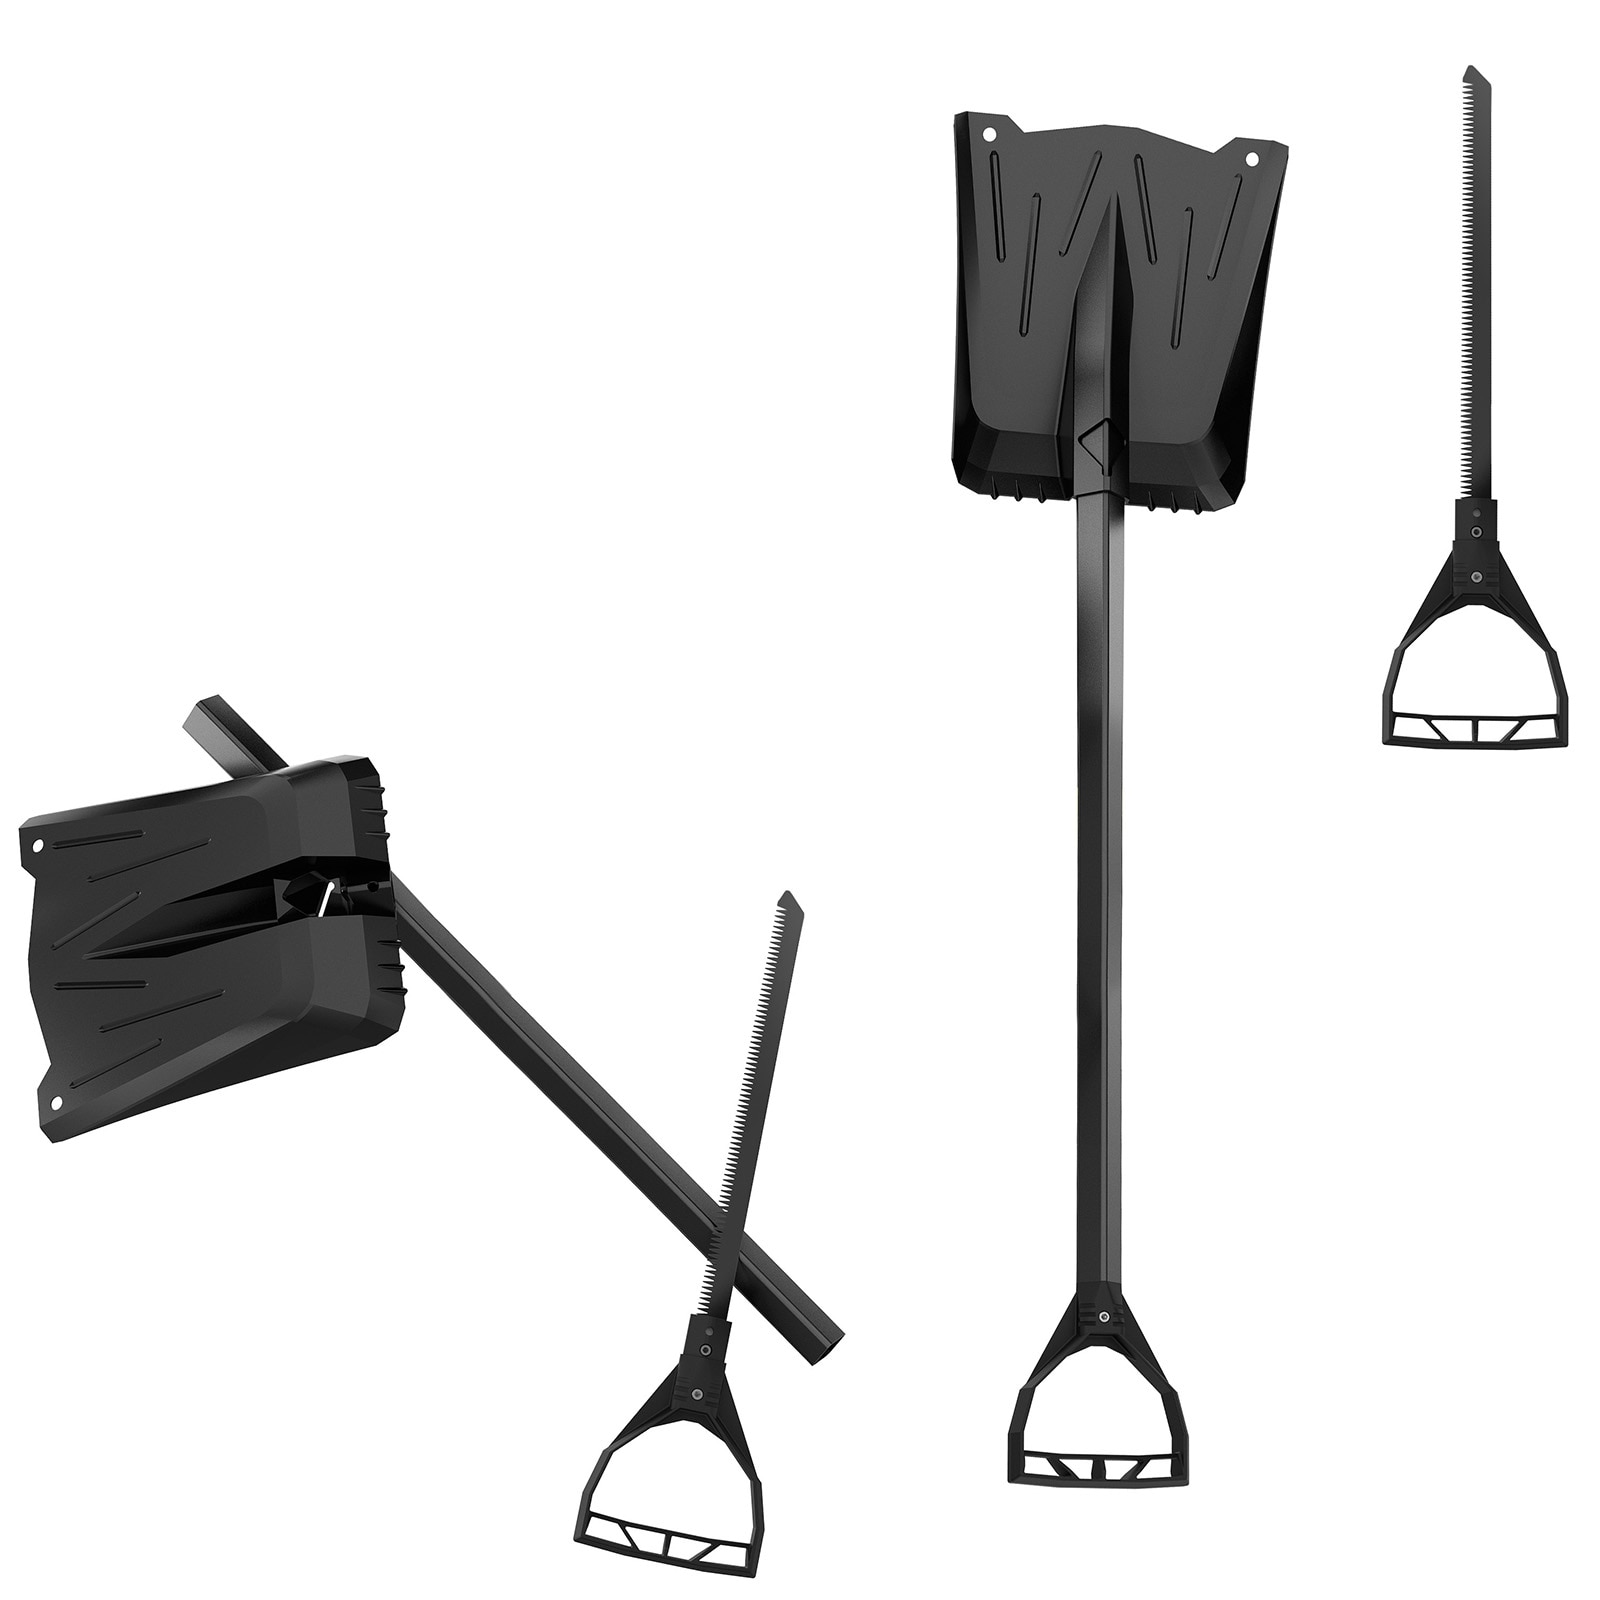 Lynx shovel with saw